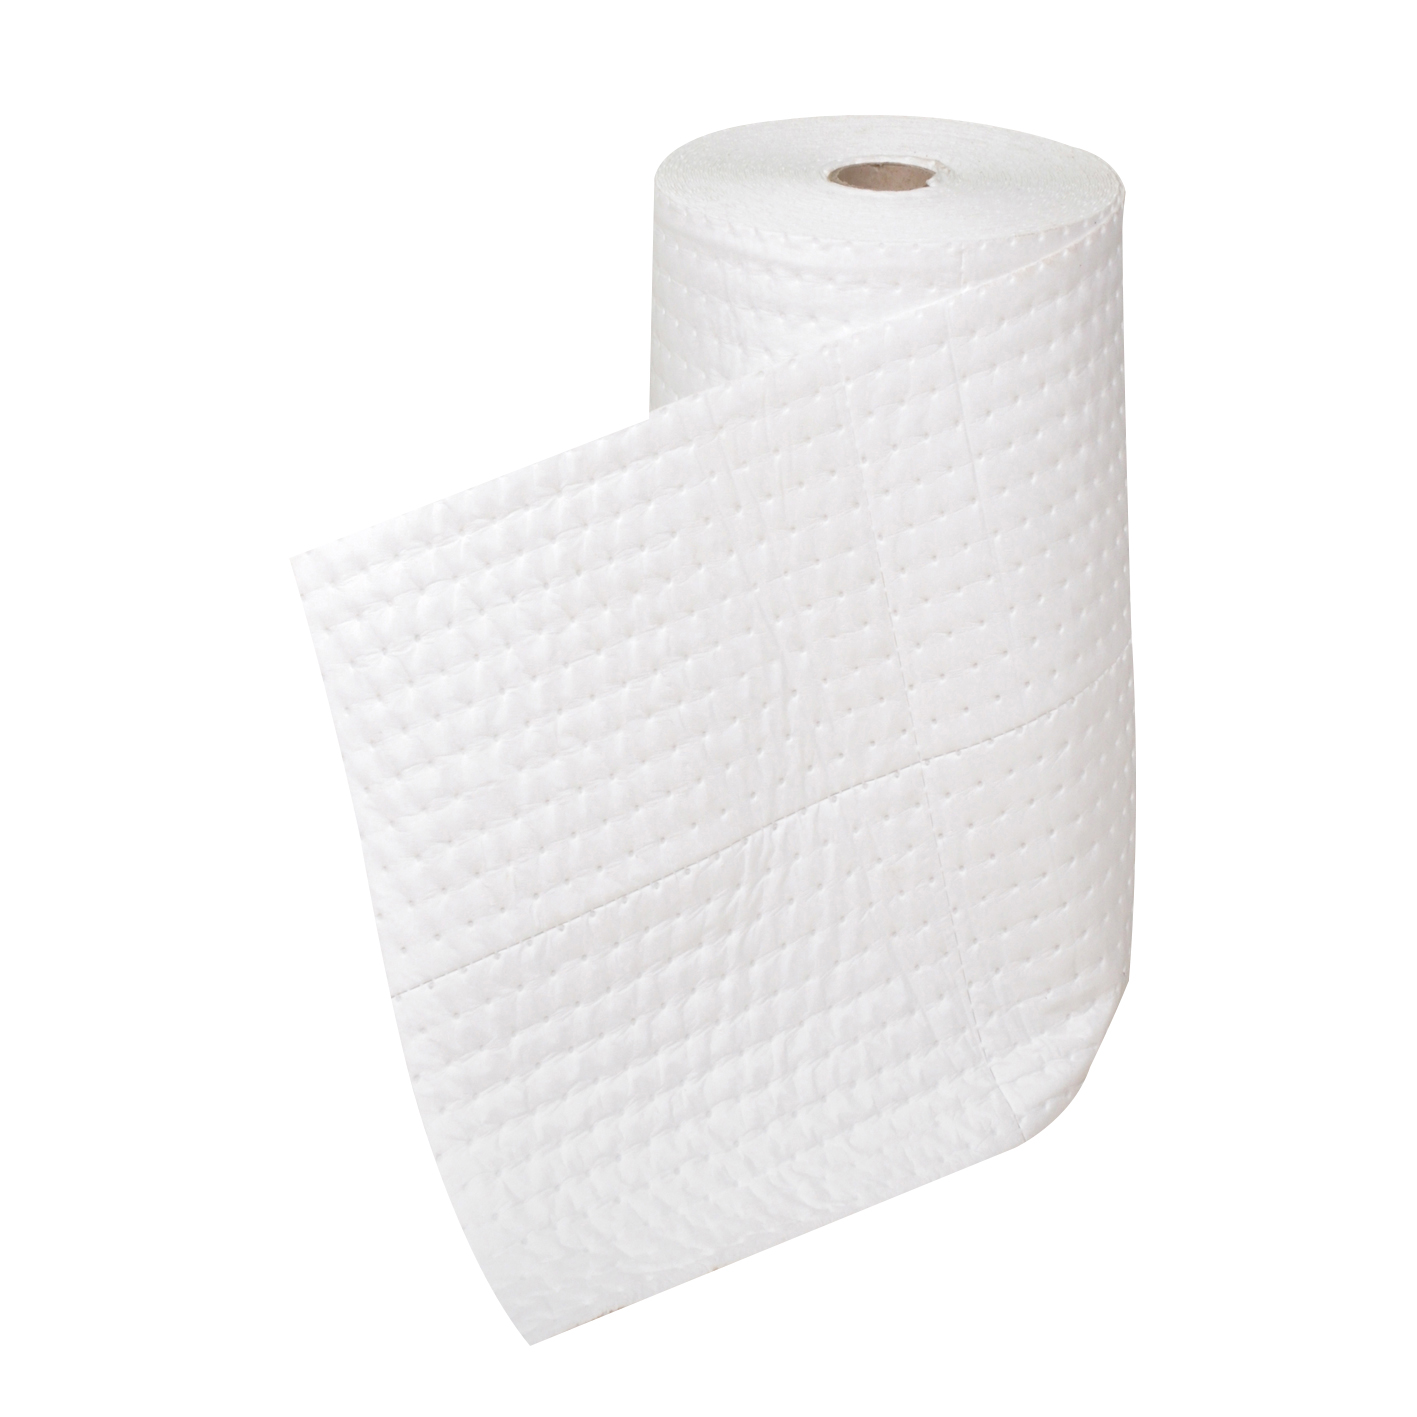 Poly pack of 1 Double Weight Oil & Fuel Absorbent Roll 96cm x 40m